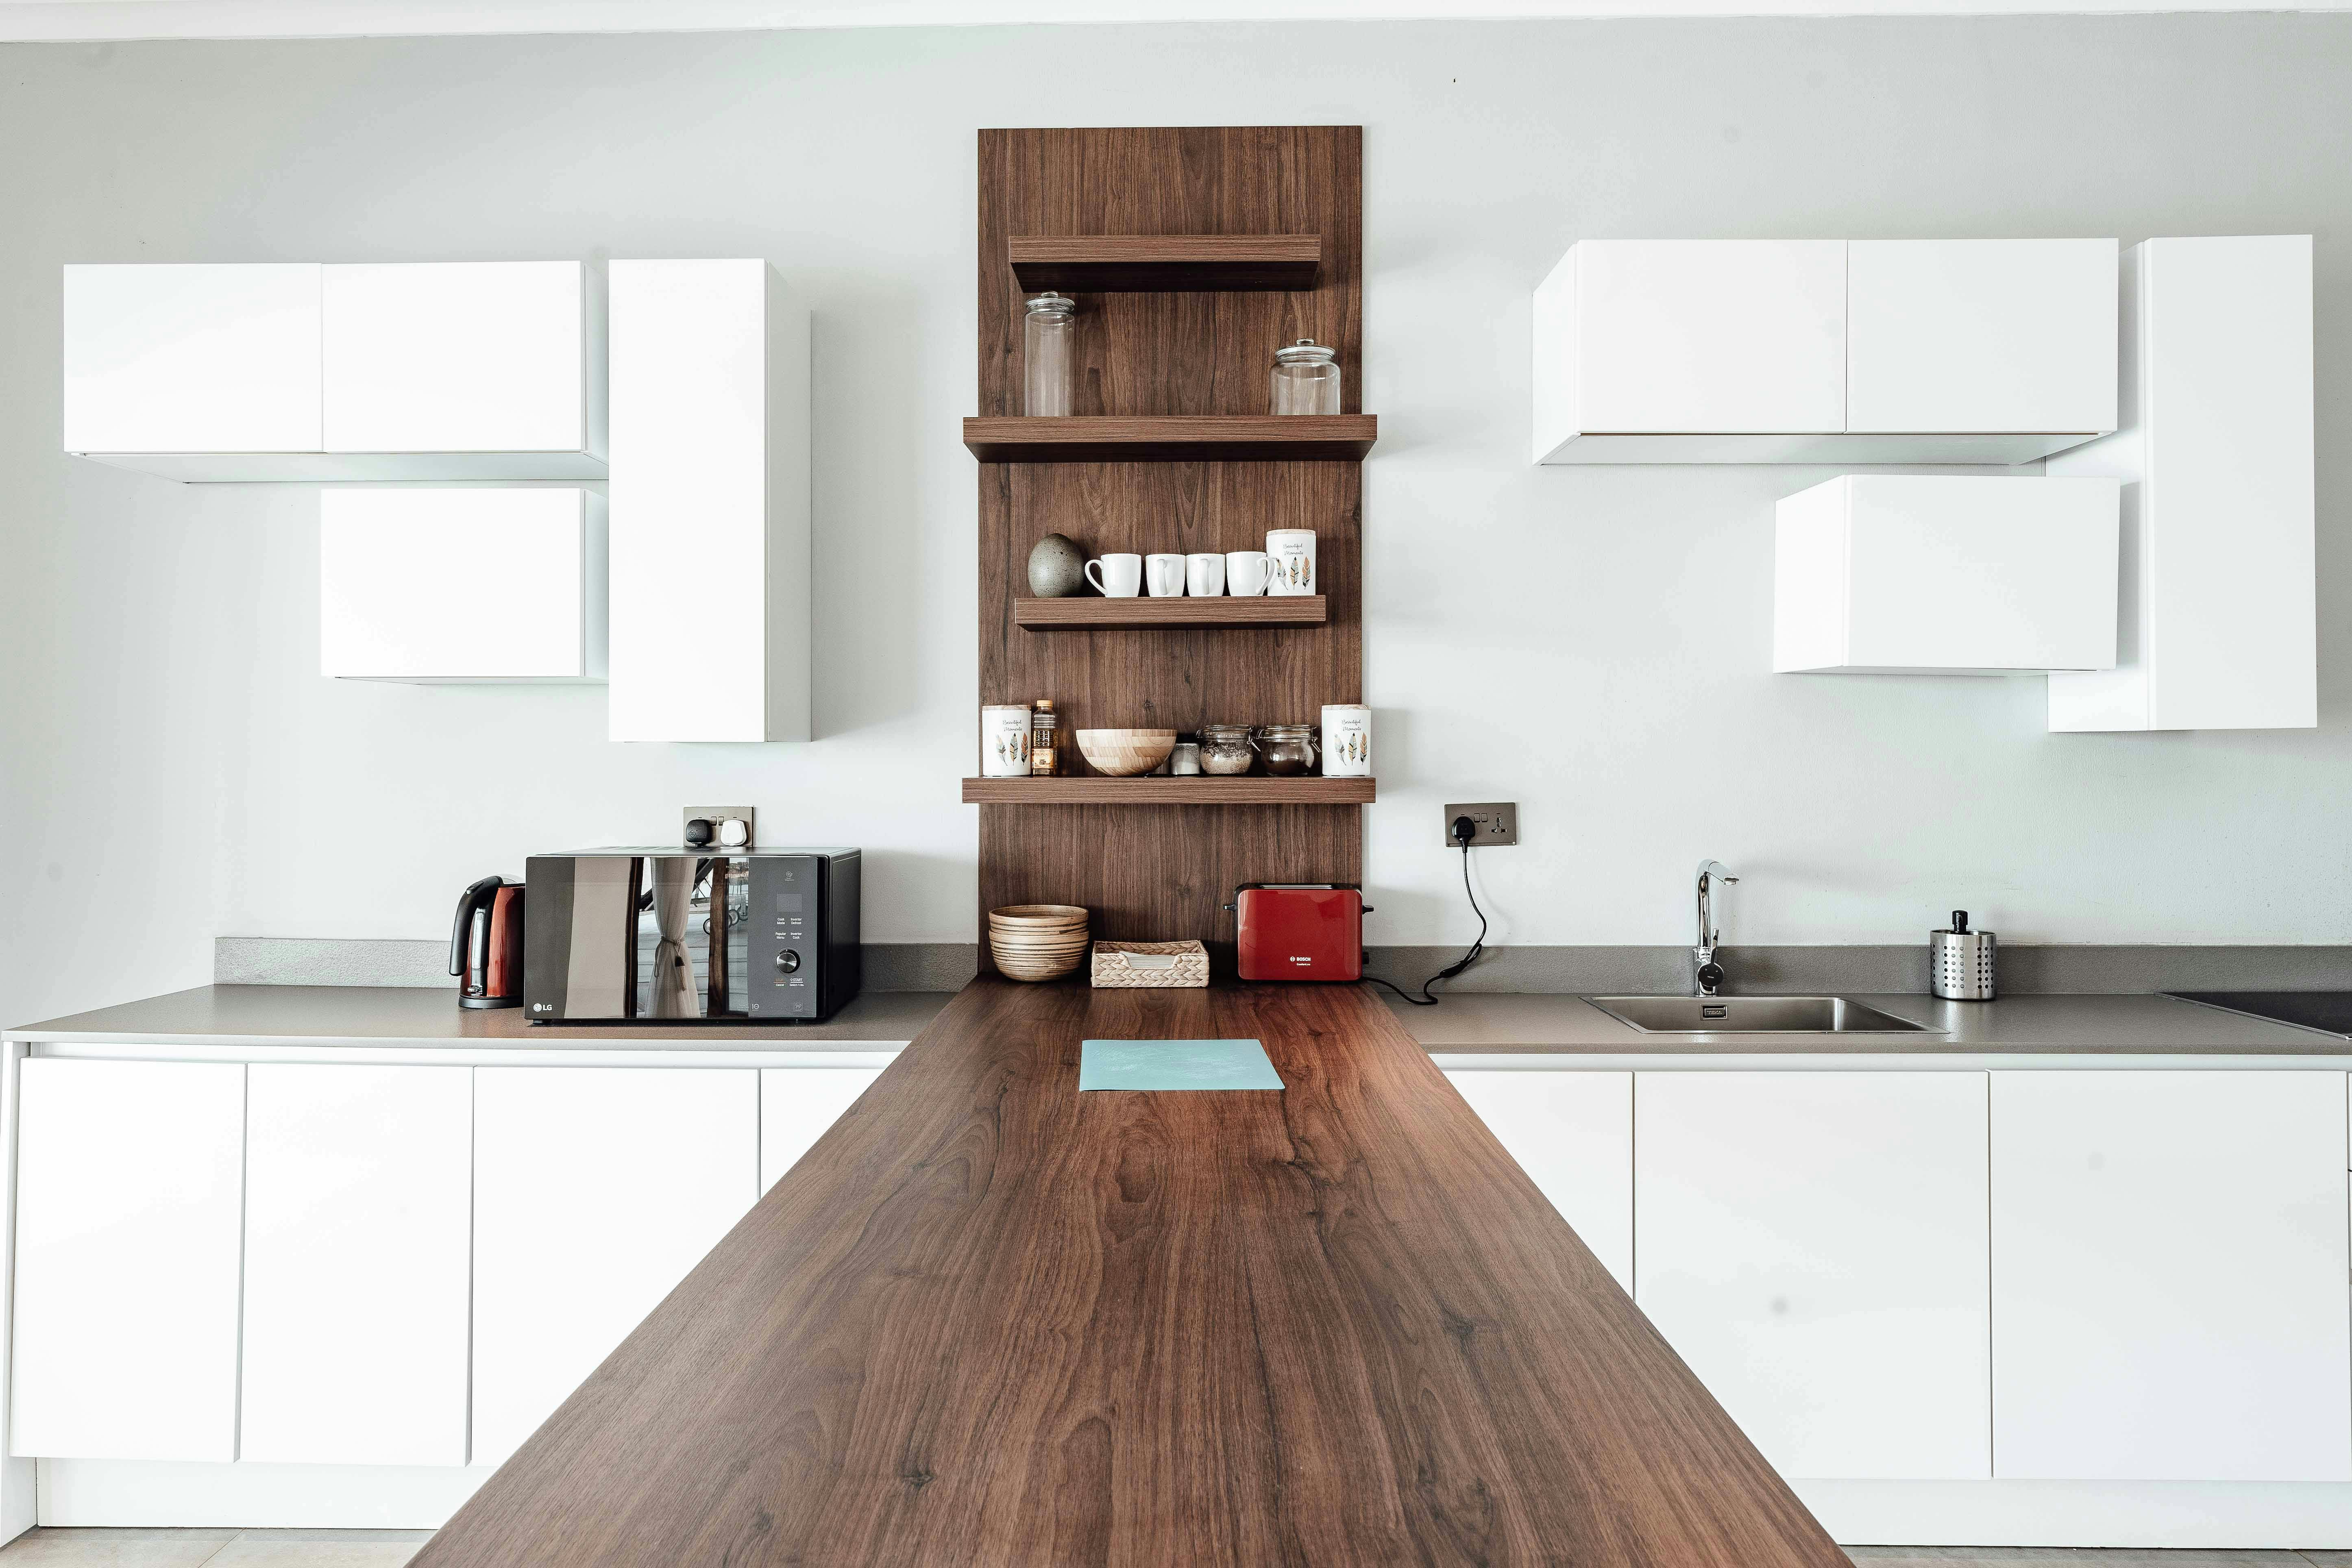 Minimalist Kitchen Design Inspiration That Many Women Have Been Craving